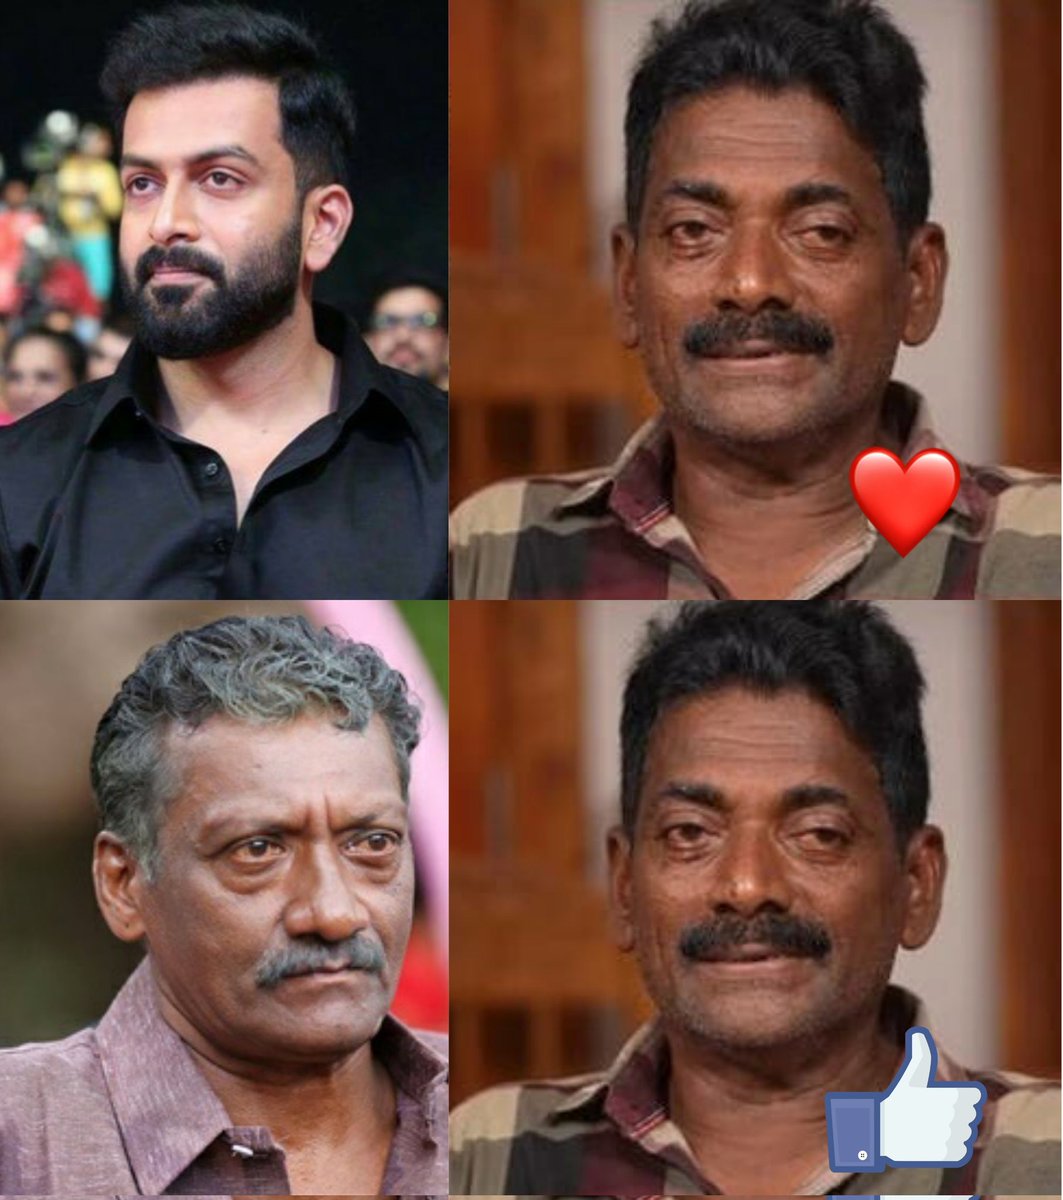 Guyzz I have a doubt! who is more suitable for #Aadujeevitham cast your opinion
❤️ or 👍🏻?
#NambiarAdarshNarayananPV #PrithvirajSukumaran #ChembilAshokan @PrithviOfficial @ChembilAshokan #aadujeevithammovie #aadujeevithamreview #AadujeevithamTheGoatLife #NajeebMuhammad #WhatsApp